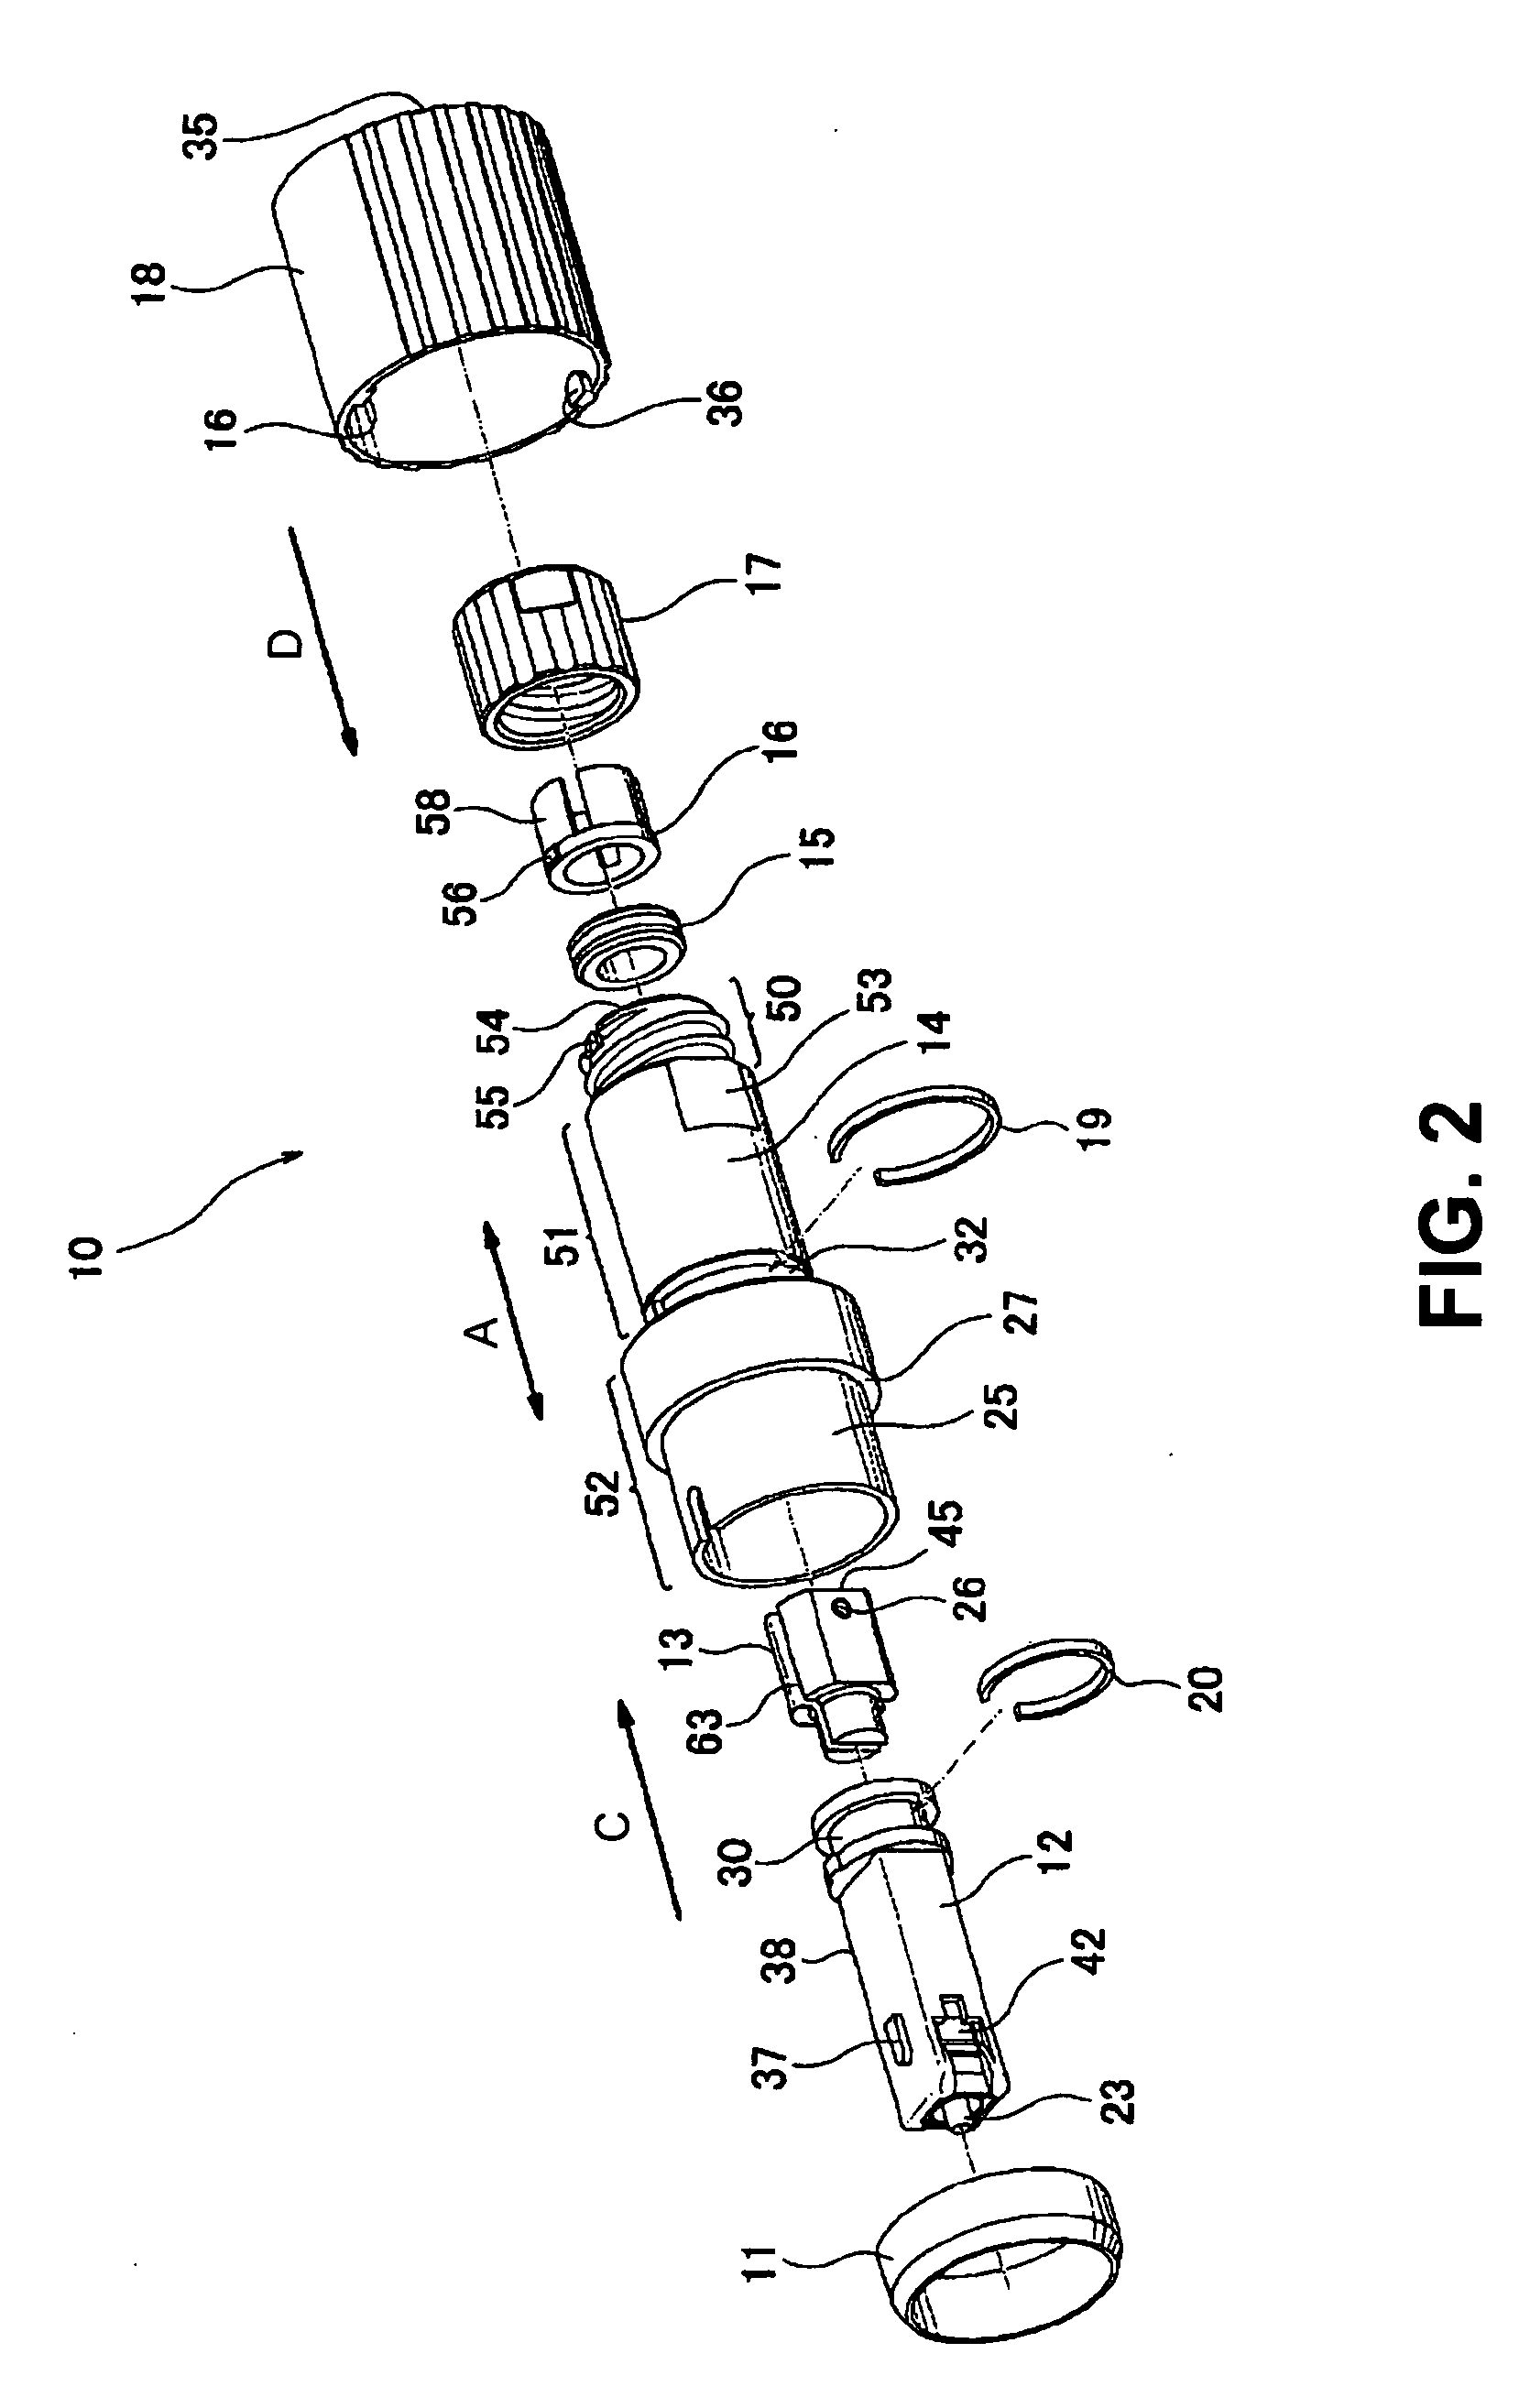 Waterproof connector and waterproof apparatus using the same